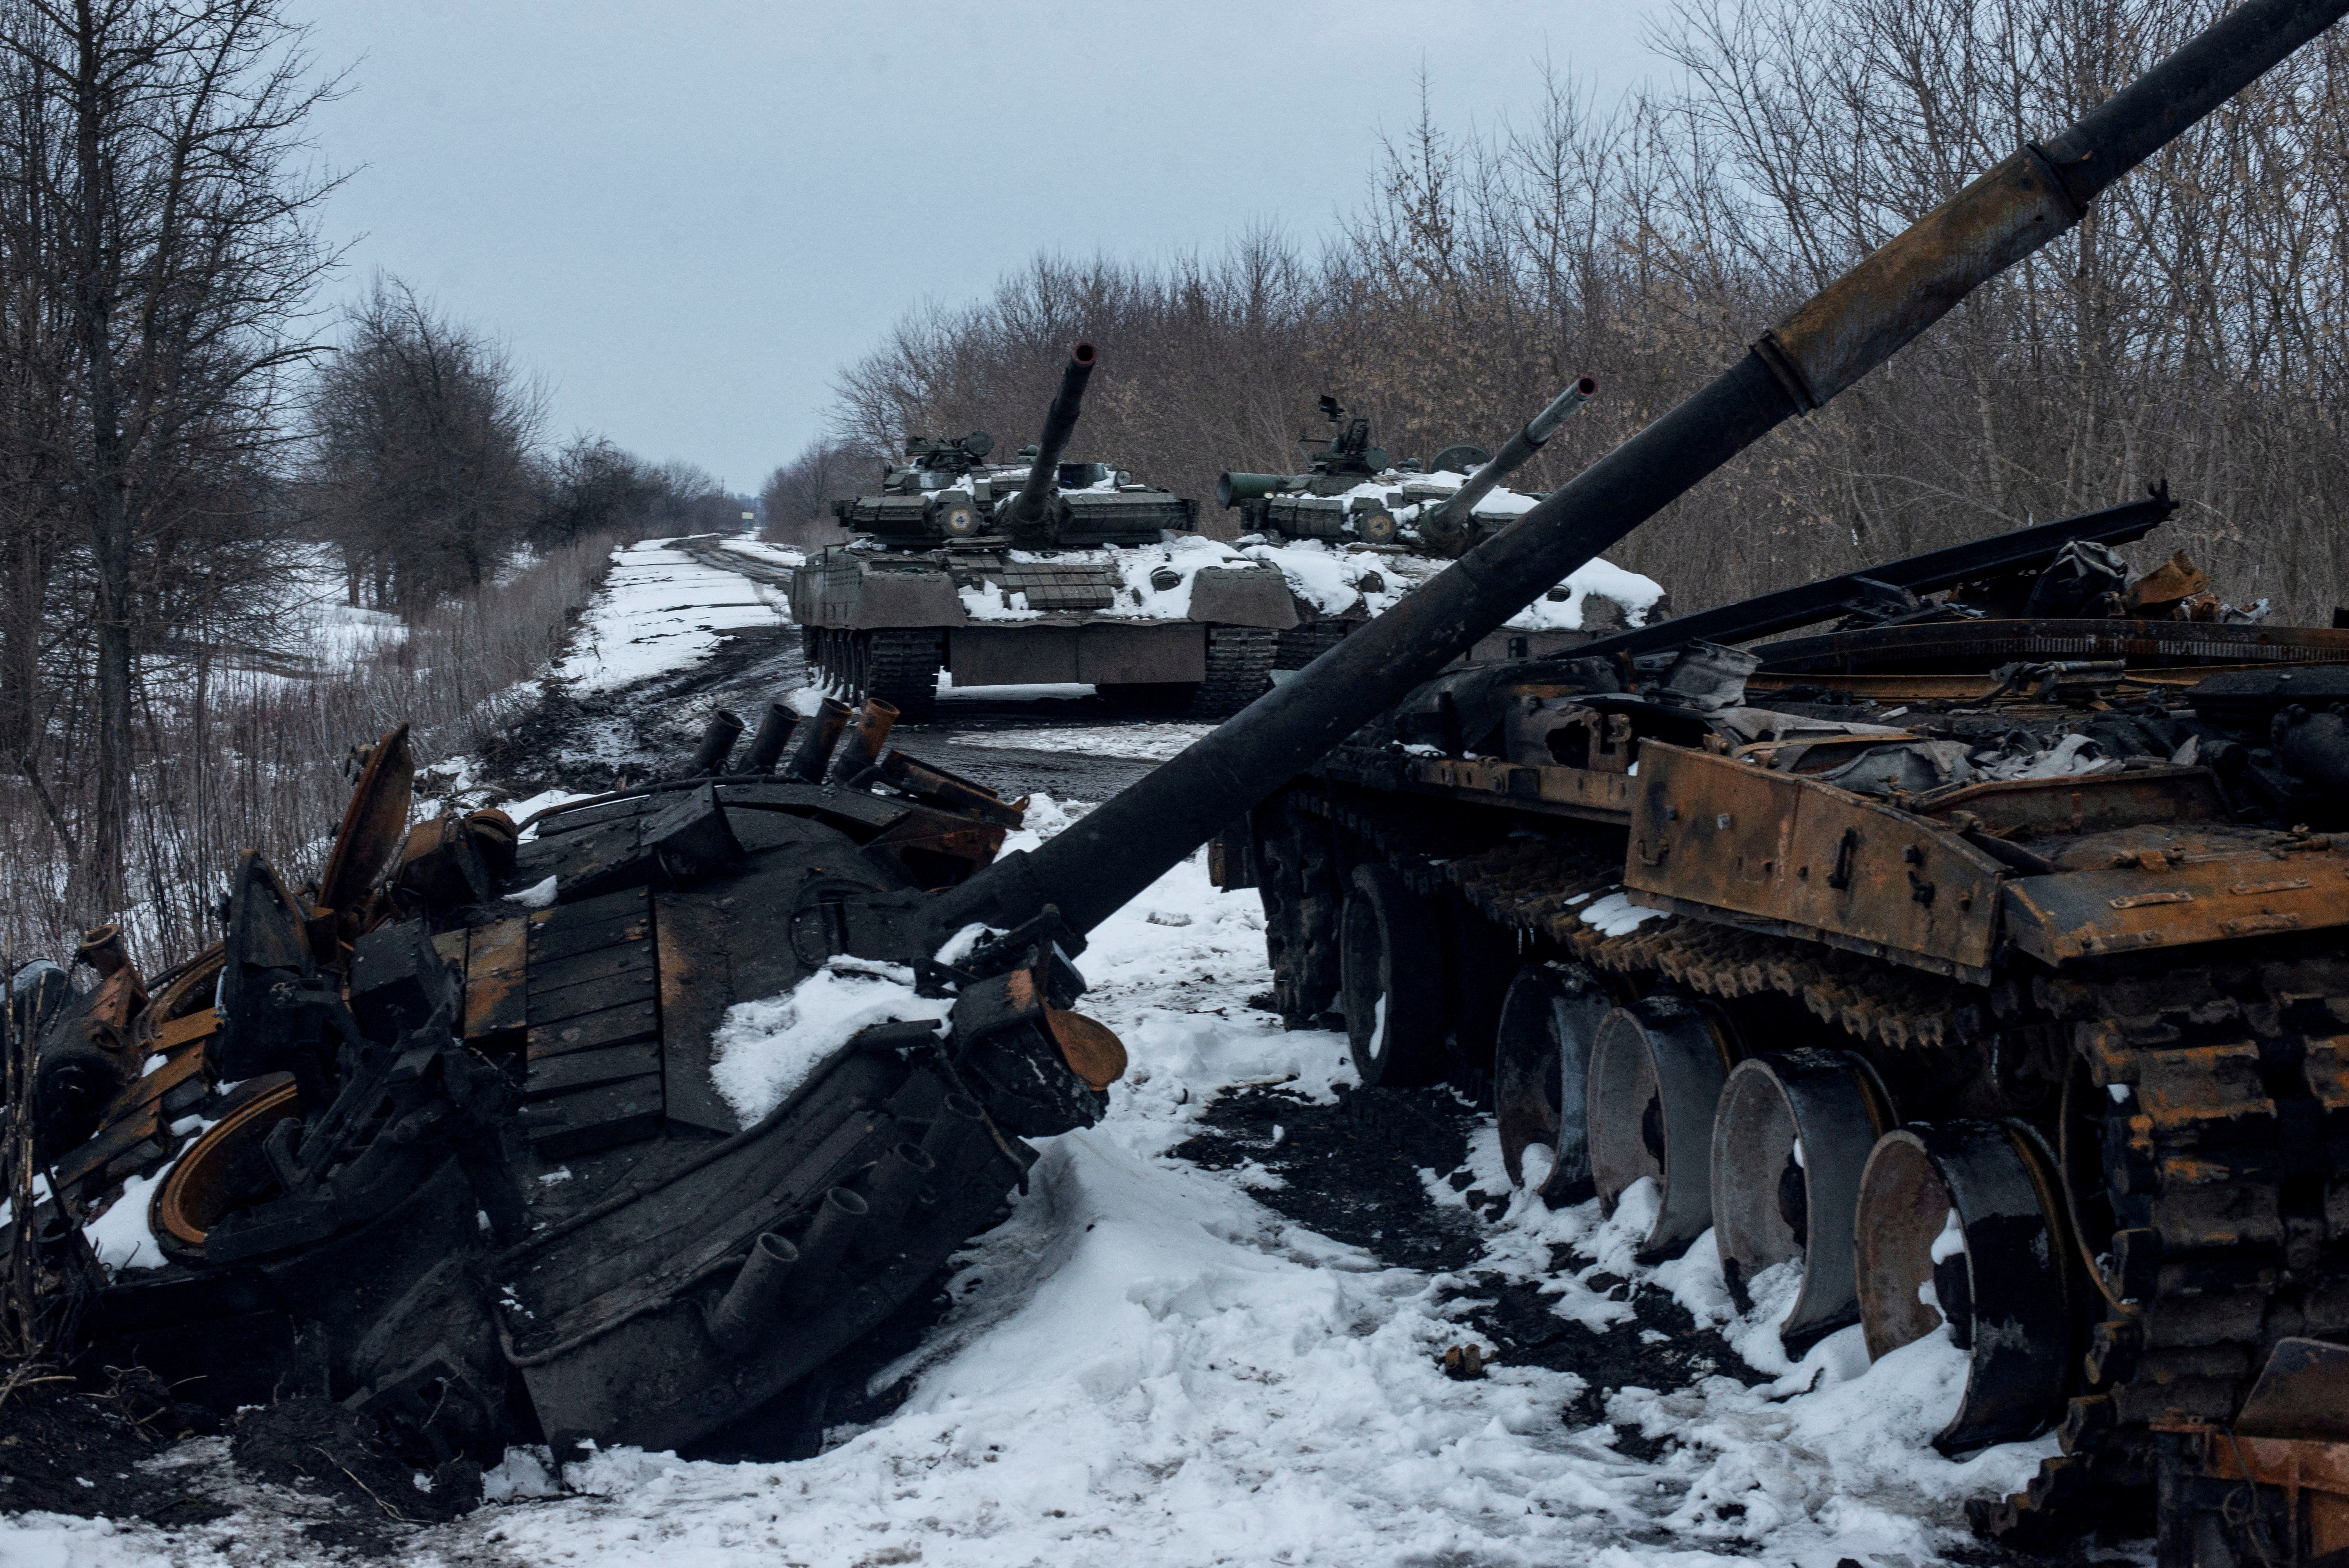 Will China help Russia with weapons in Ukraine? There are three